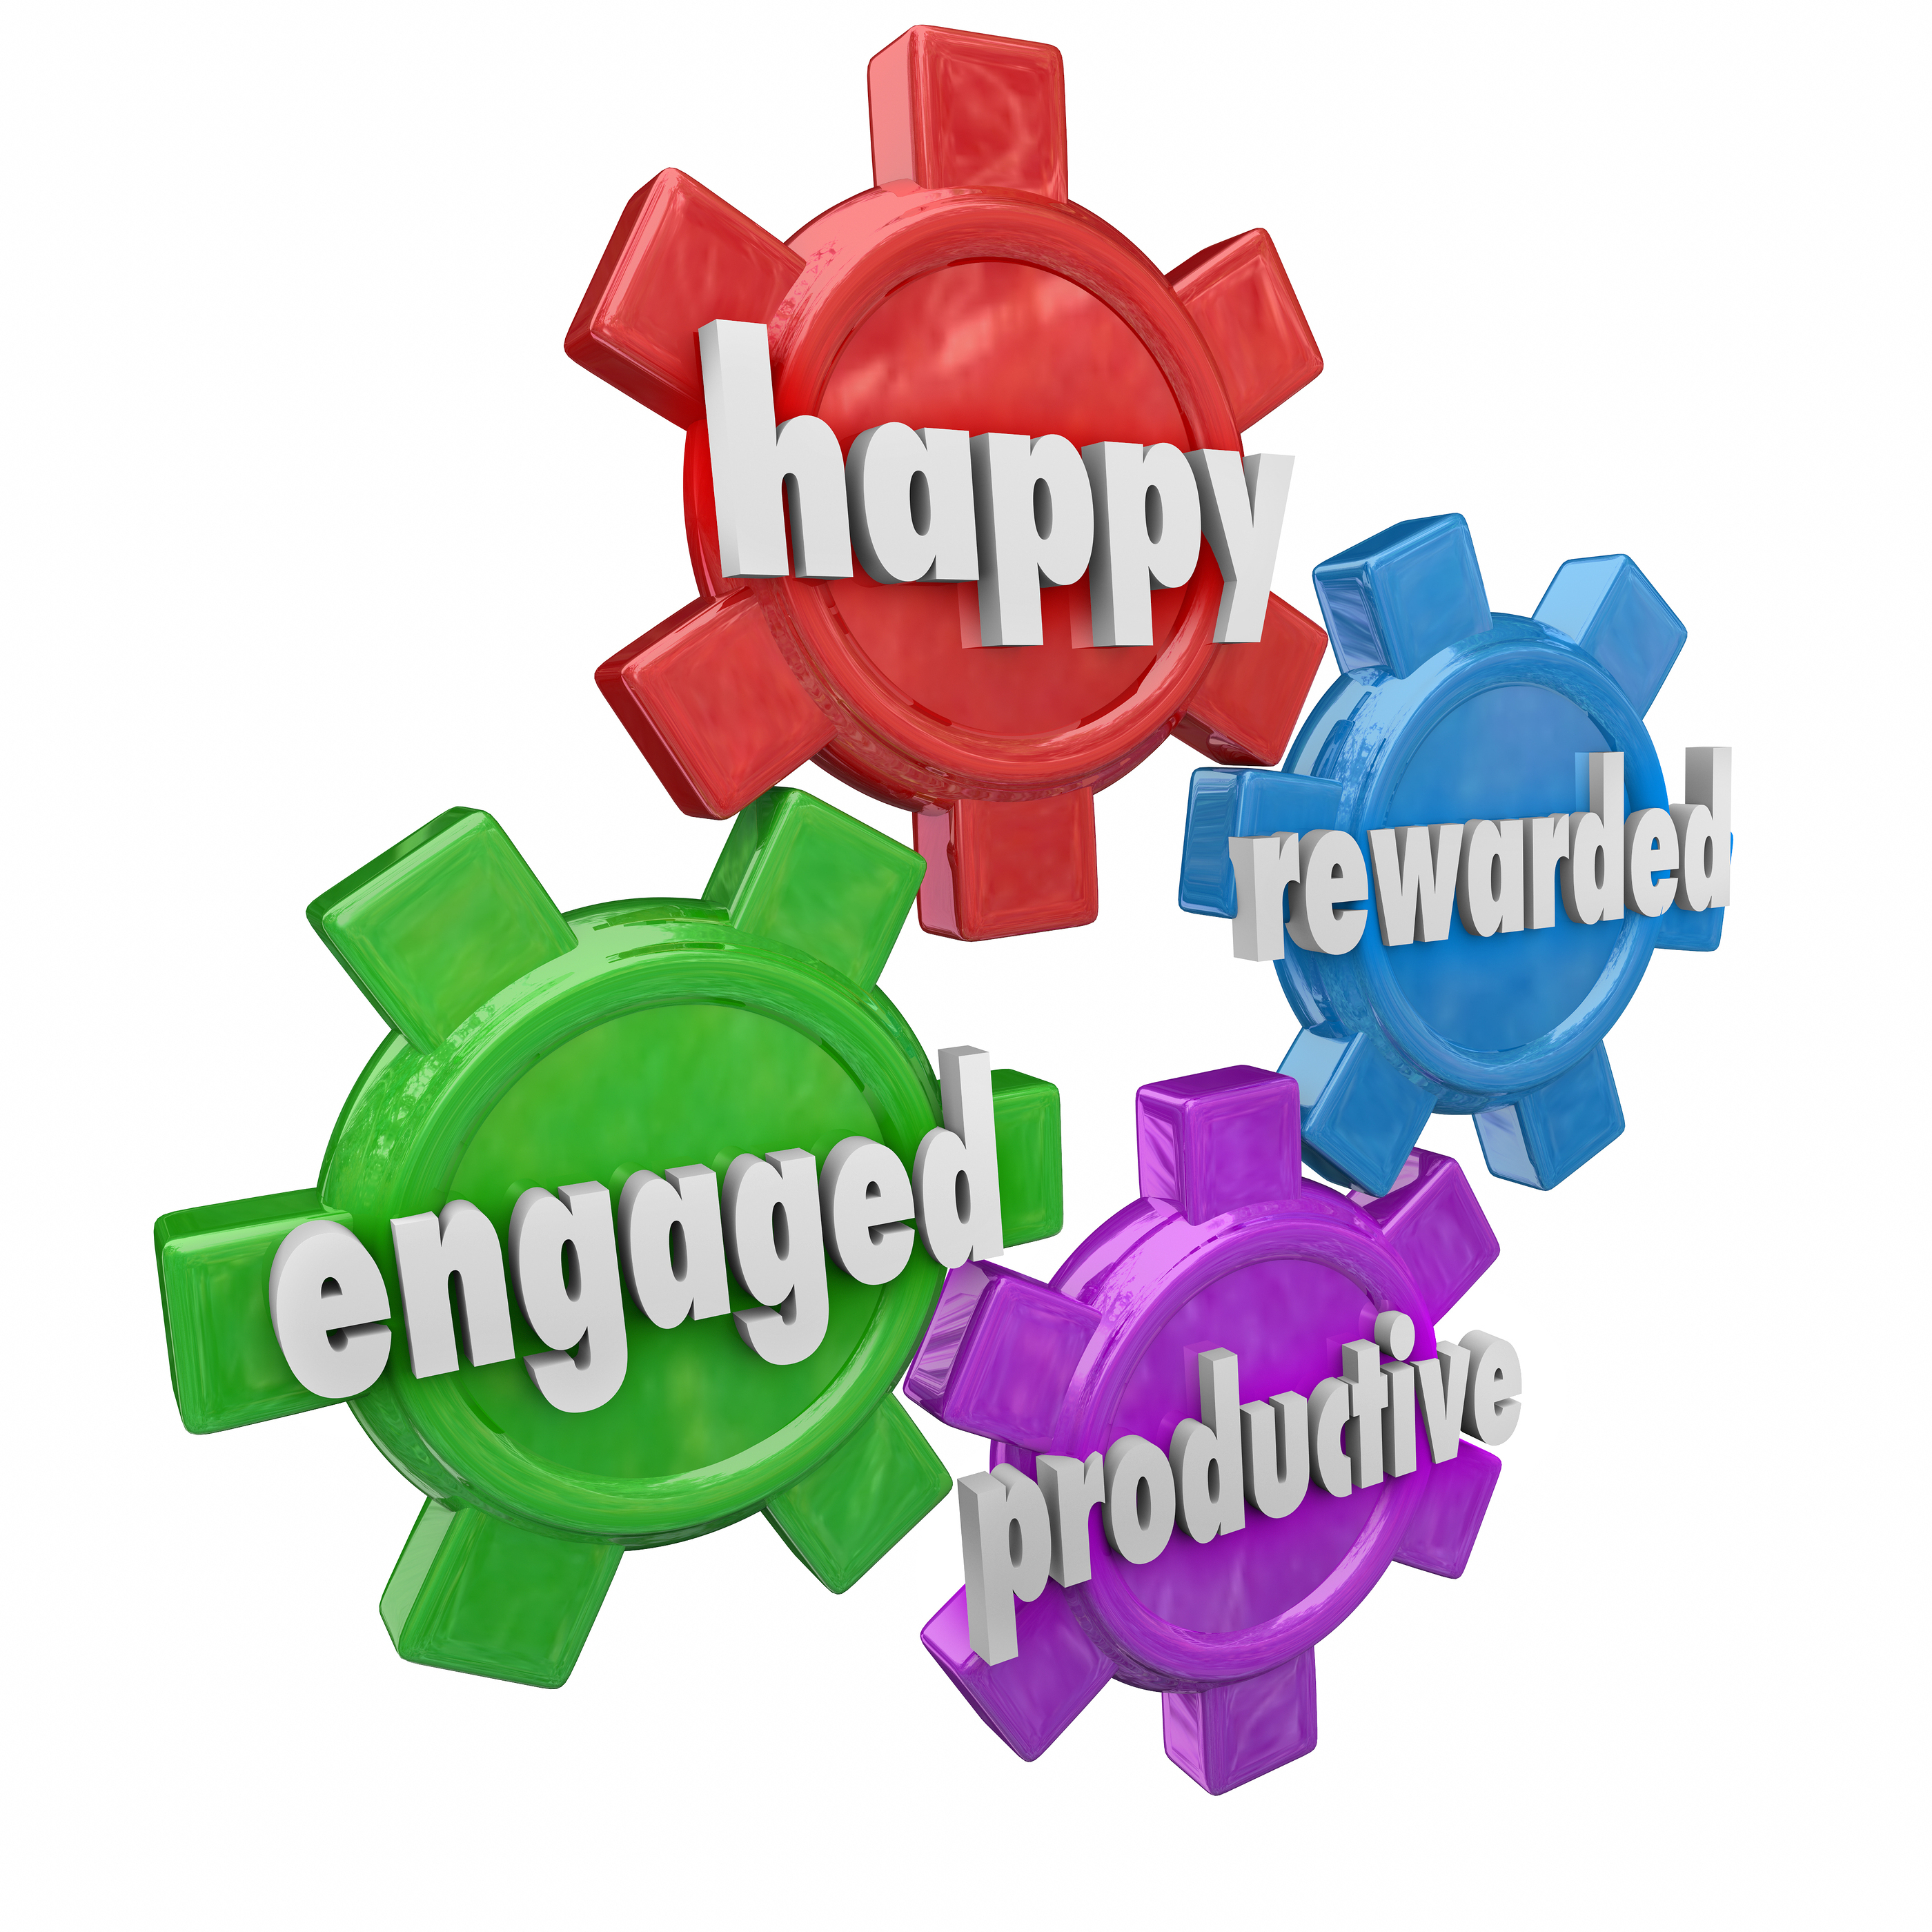 bigstock-Happy-Engaged-Rewarded-and-P-73005115_571d16bc9a219.jpg